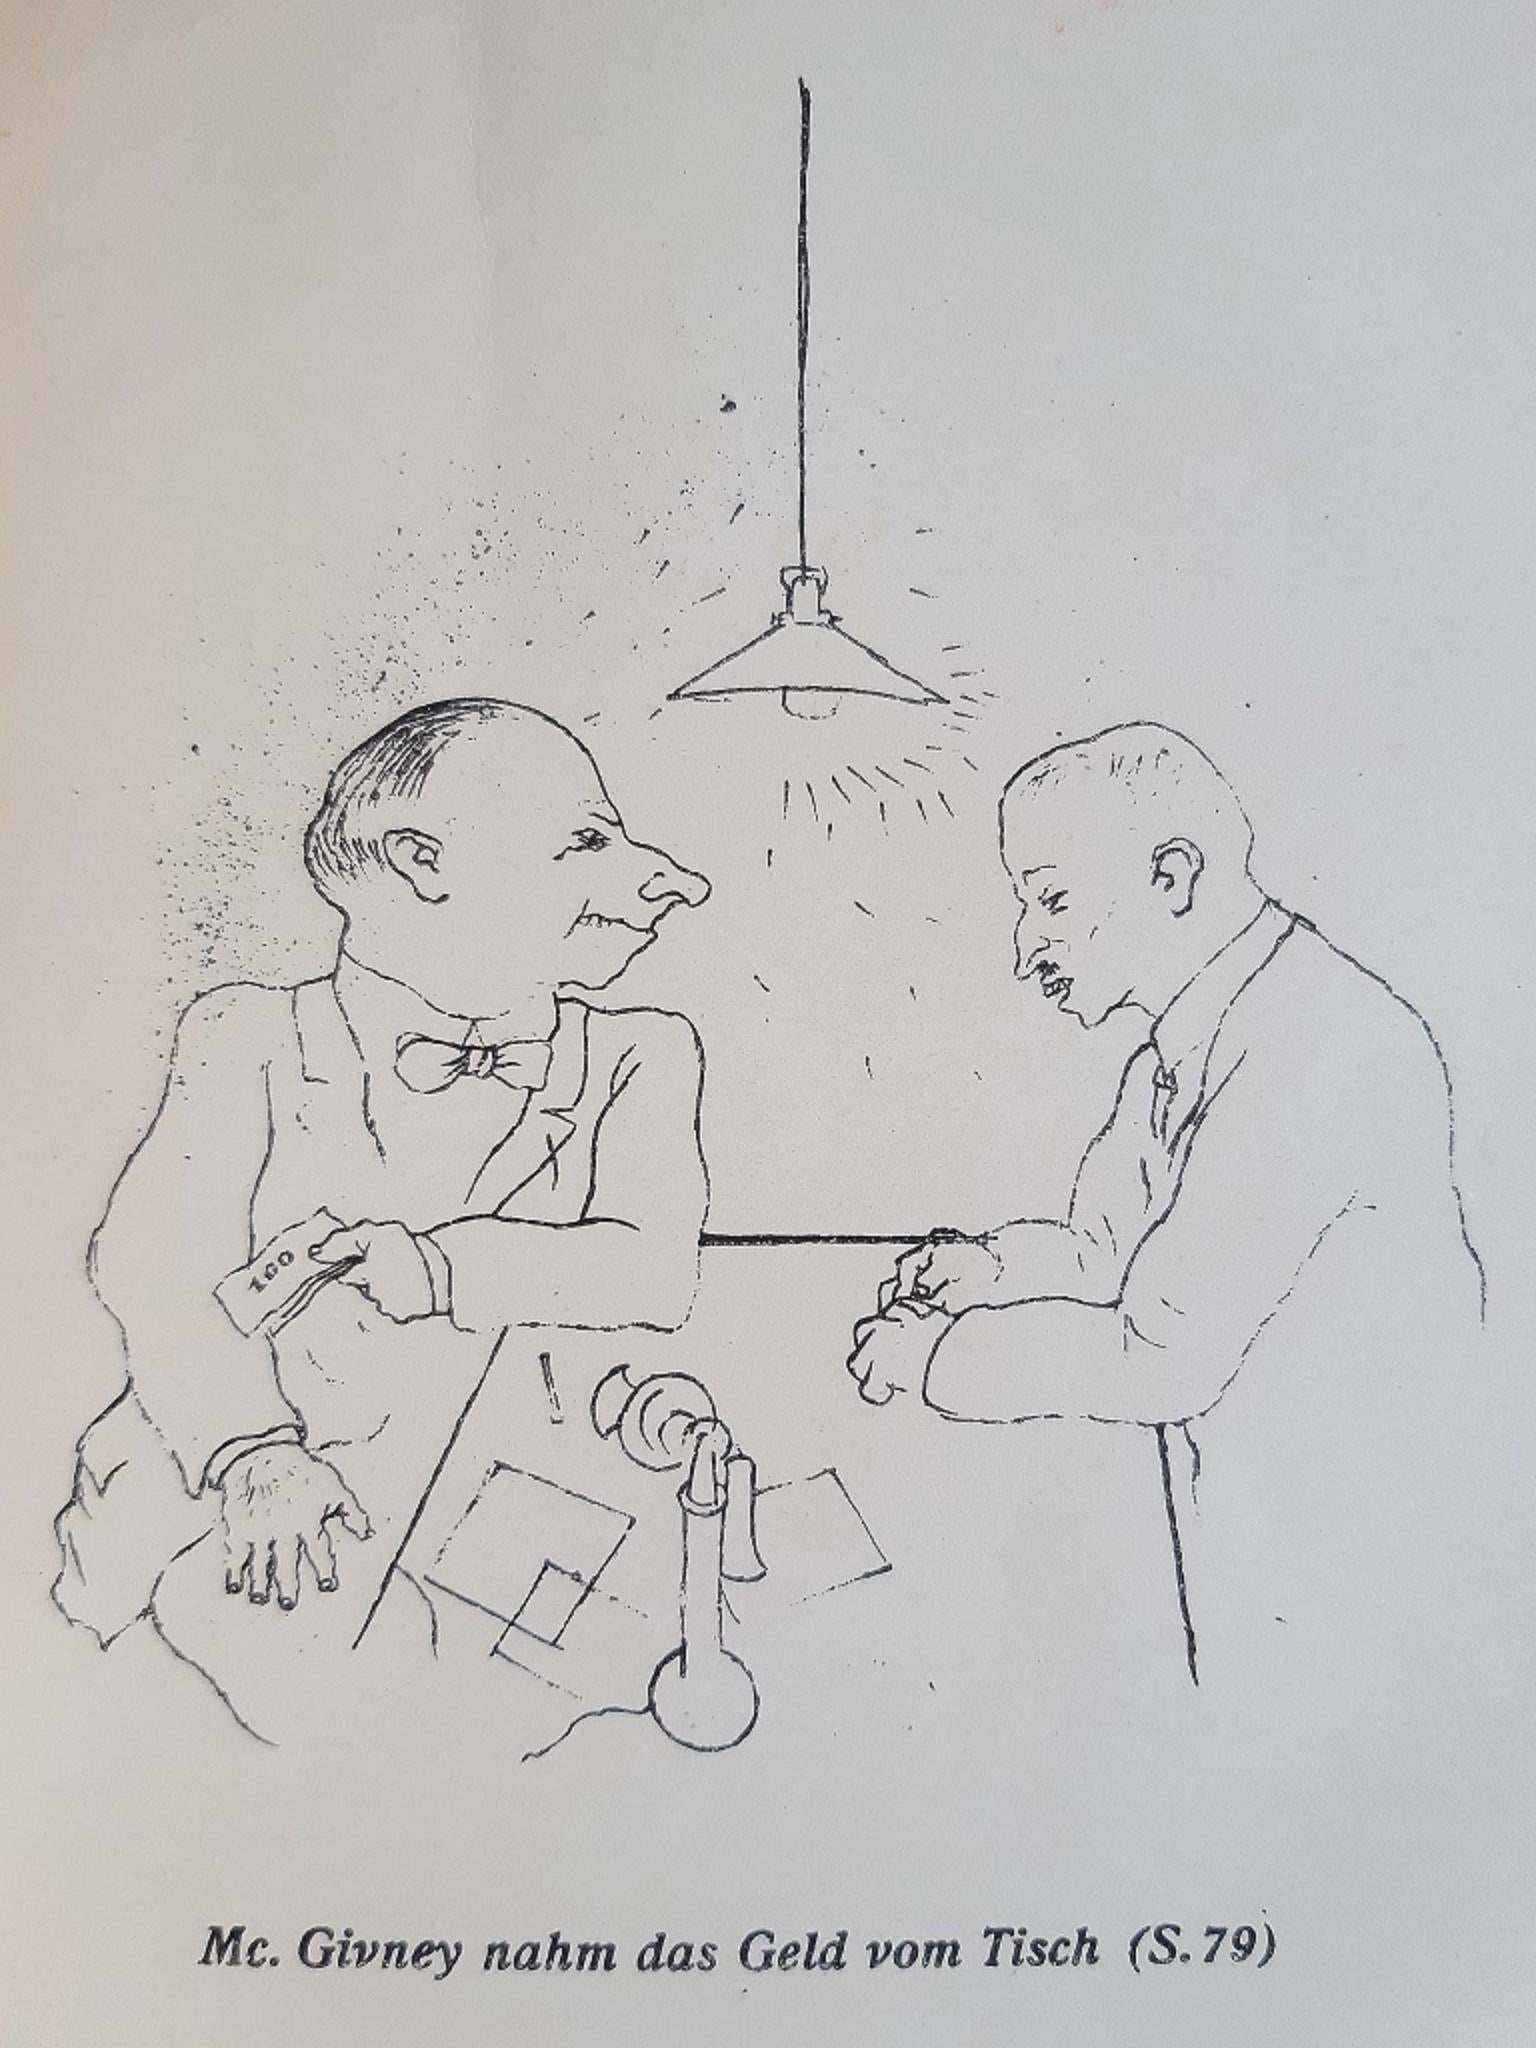 100% - Rare Book by George Grosz - 1921 For Sale 4